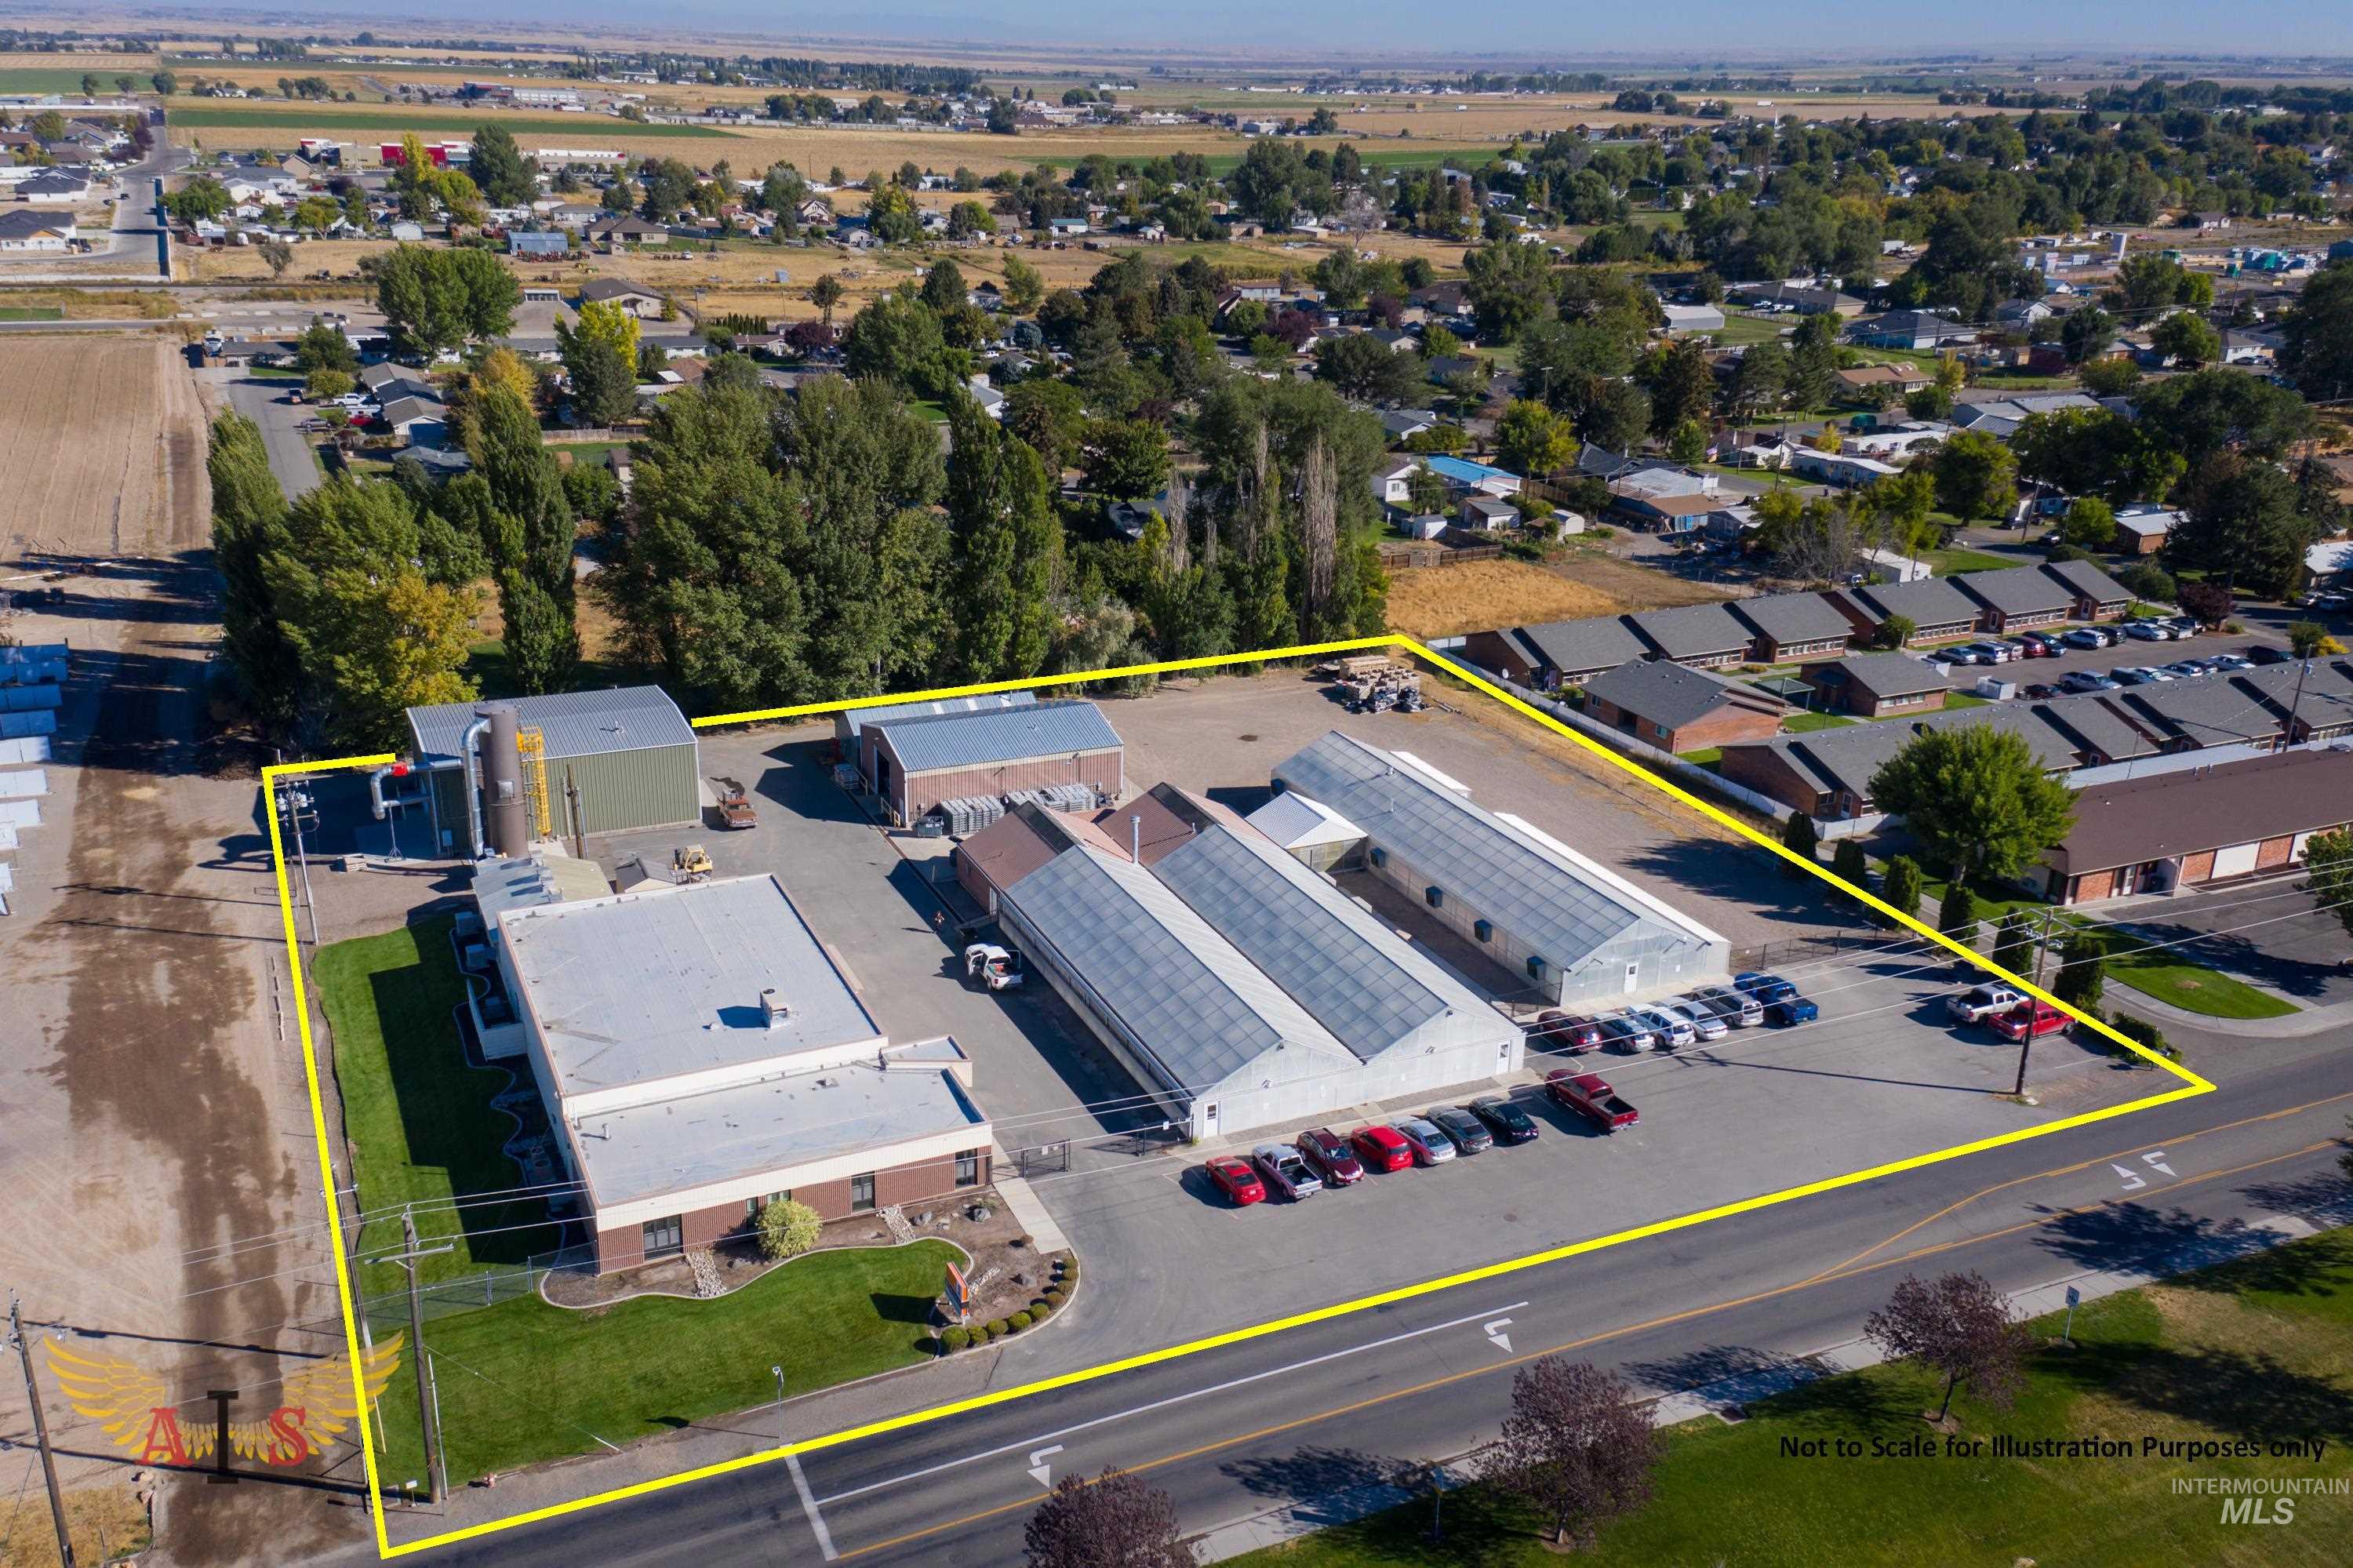 898 W Center St., Kimberly, Idaho 83341, Business/Commercial For Sale, Price $2,500,000,MLS 98861080